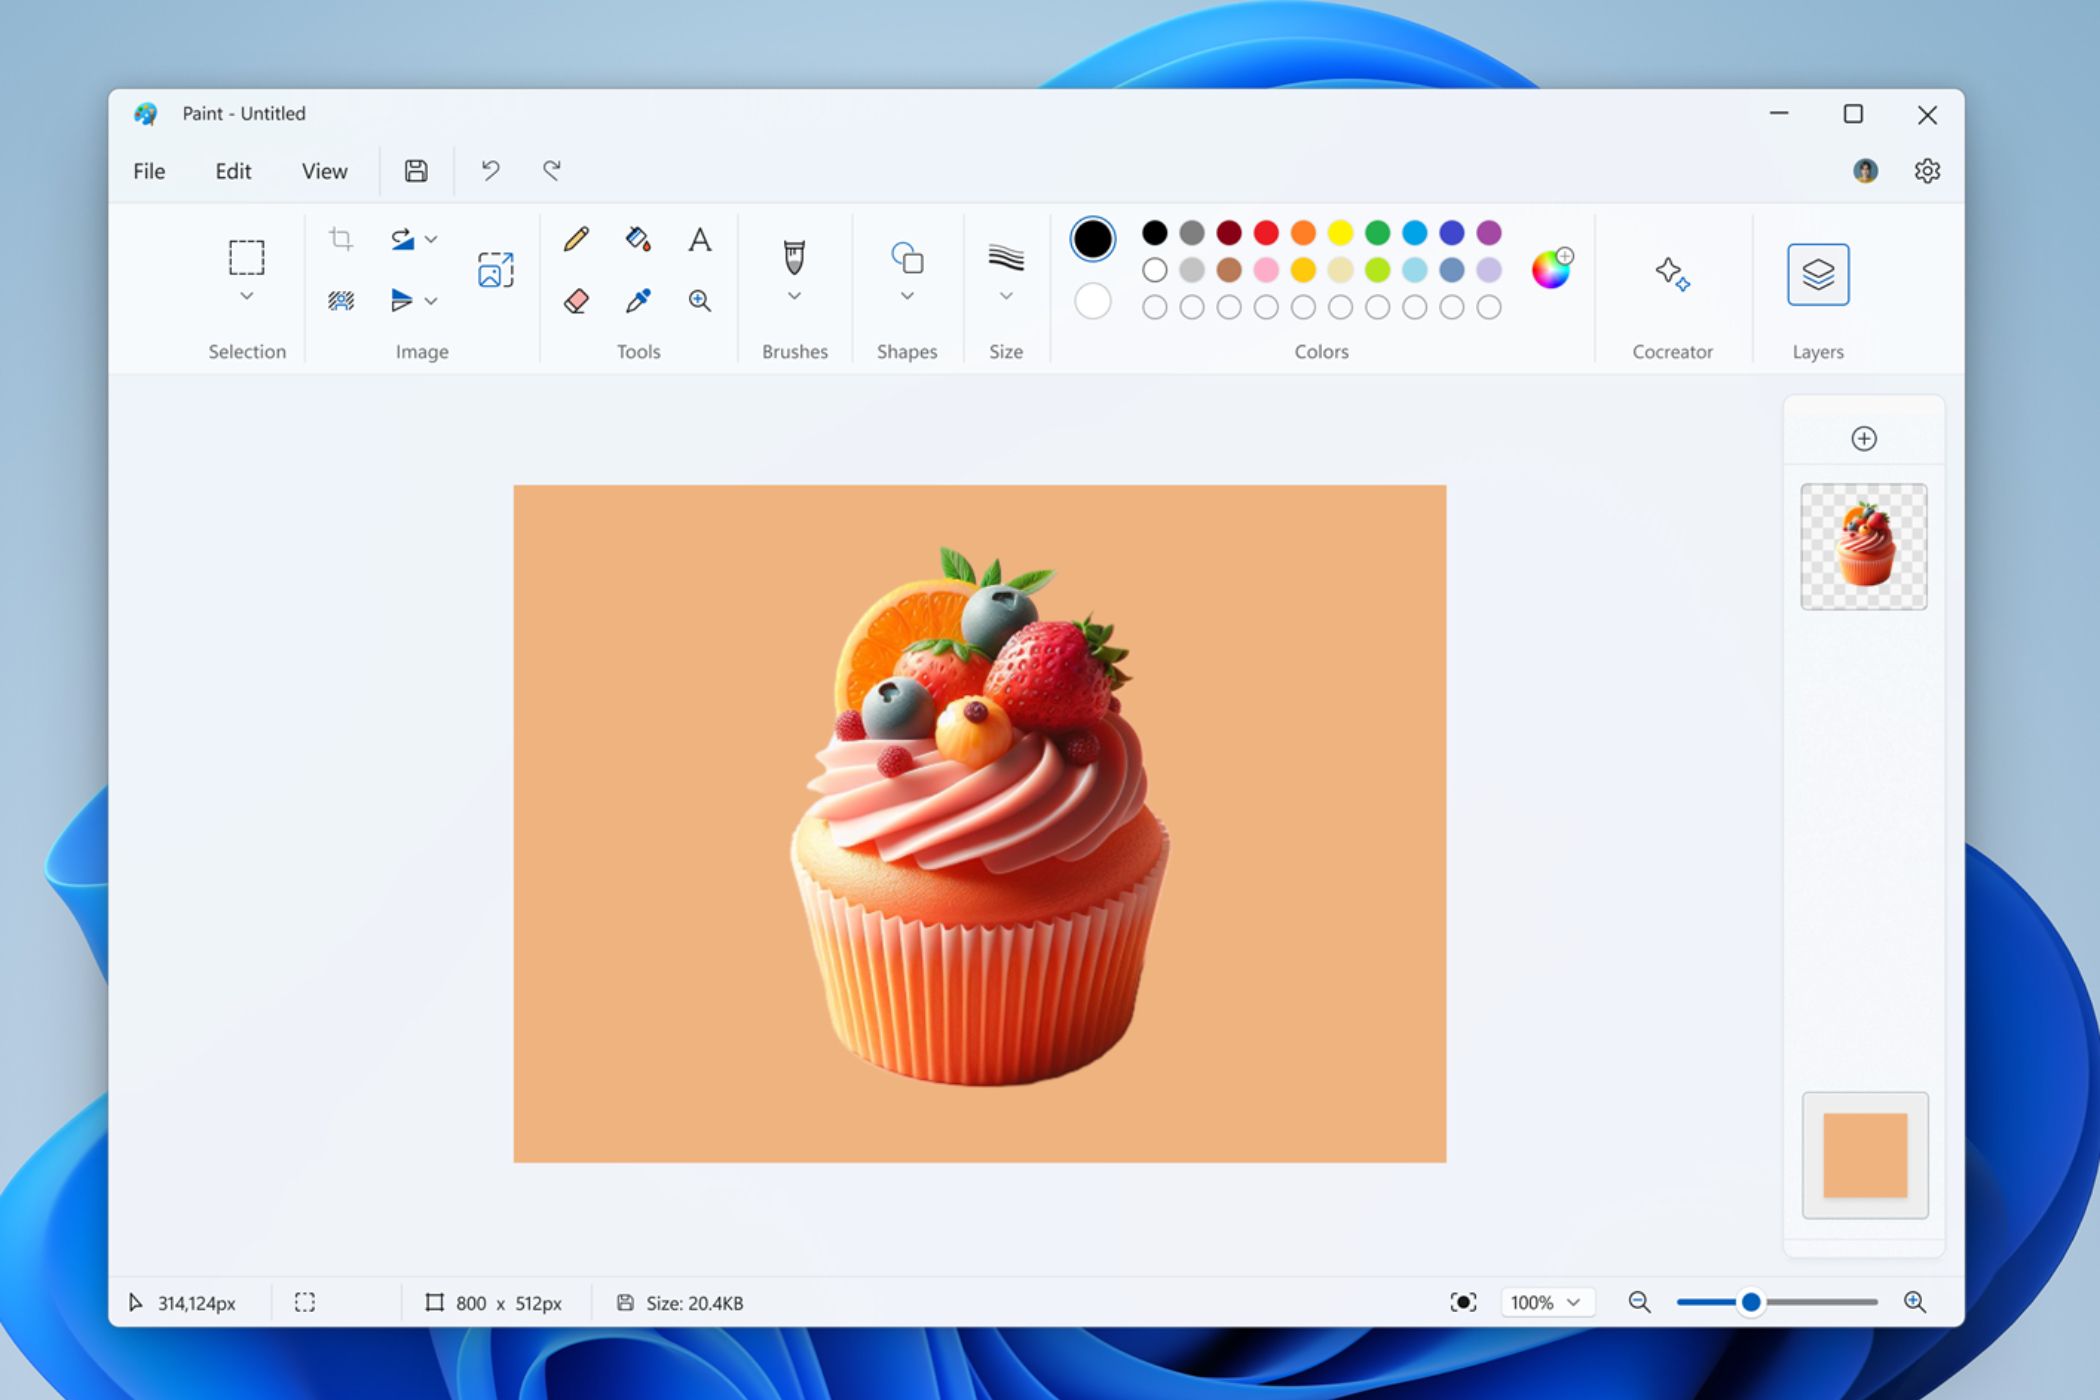 New layers option in Microsoft Paint